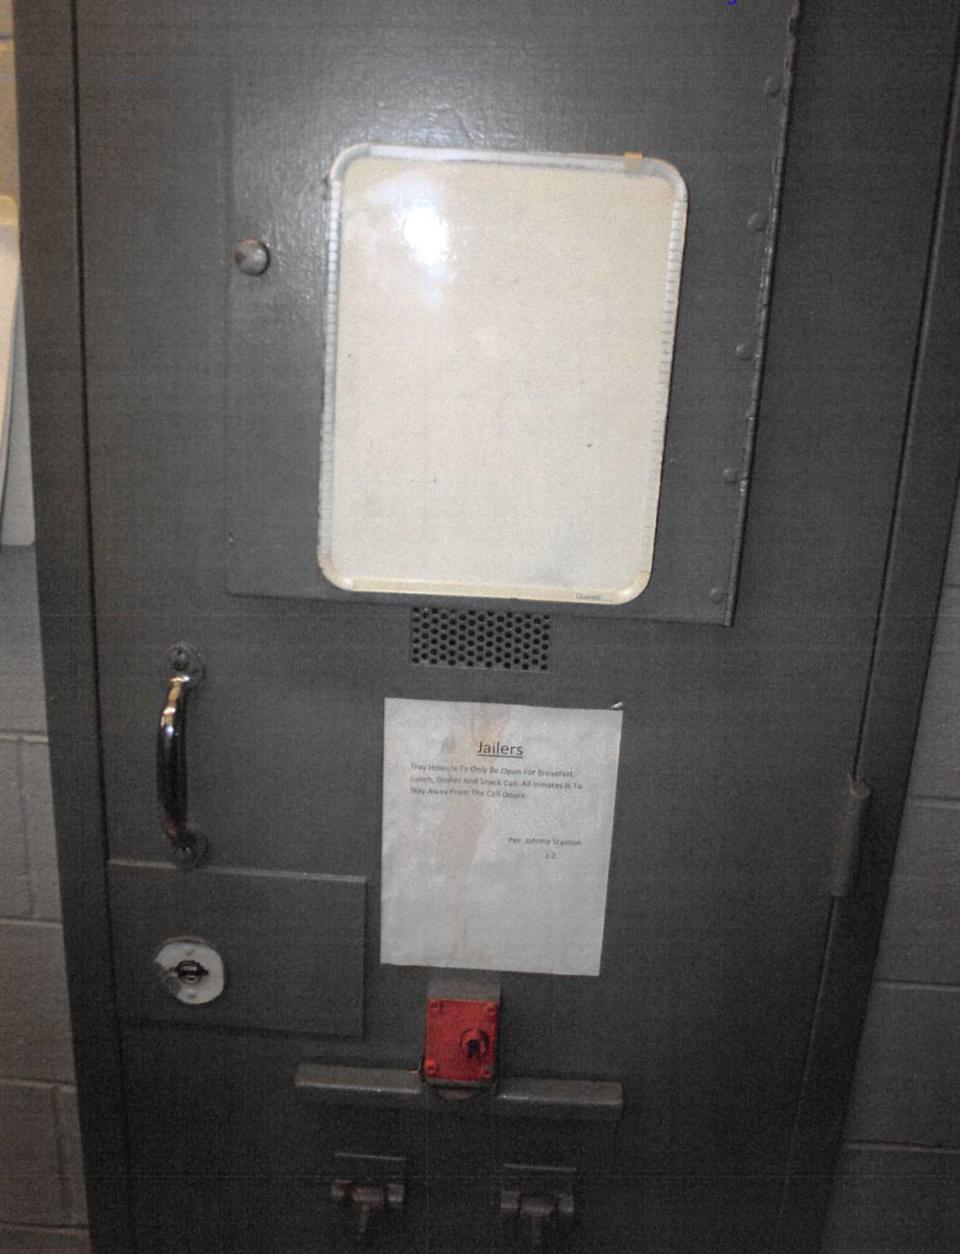 The door of the Benton County Jail cell where Sons was held Obtained by Mississippi Today